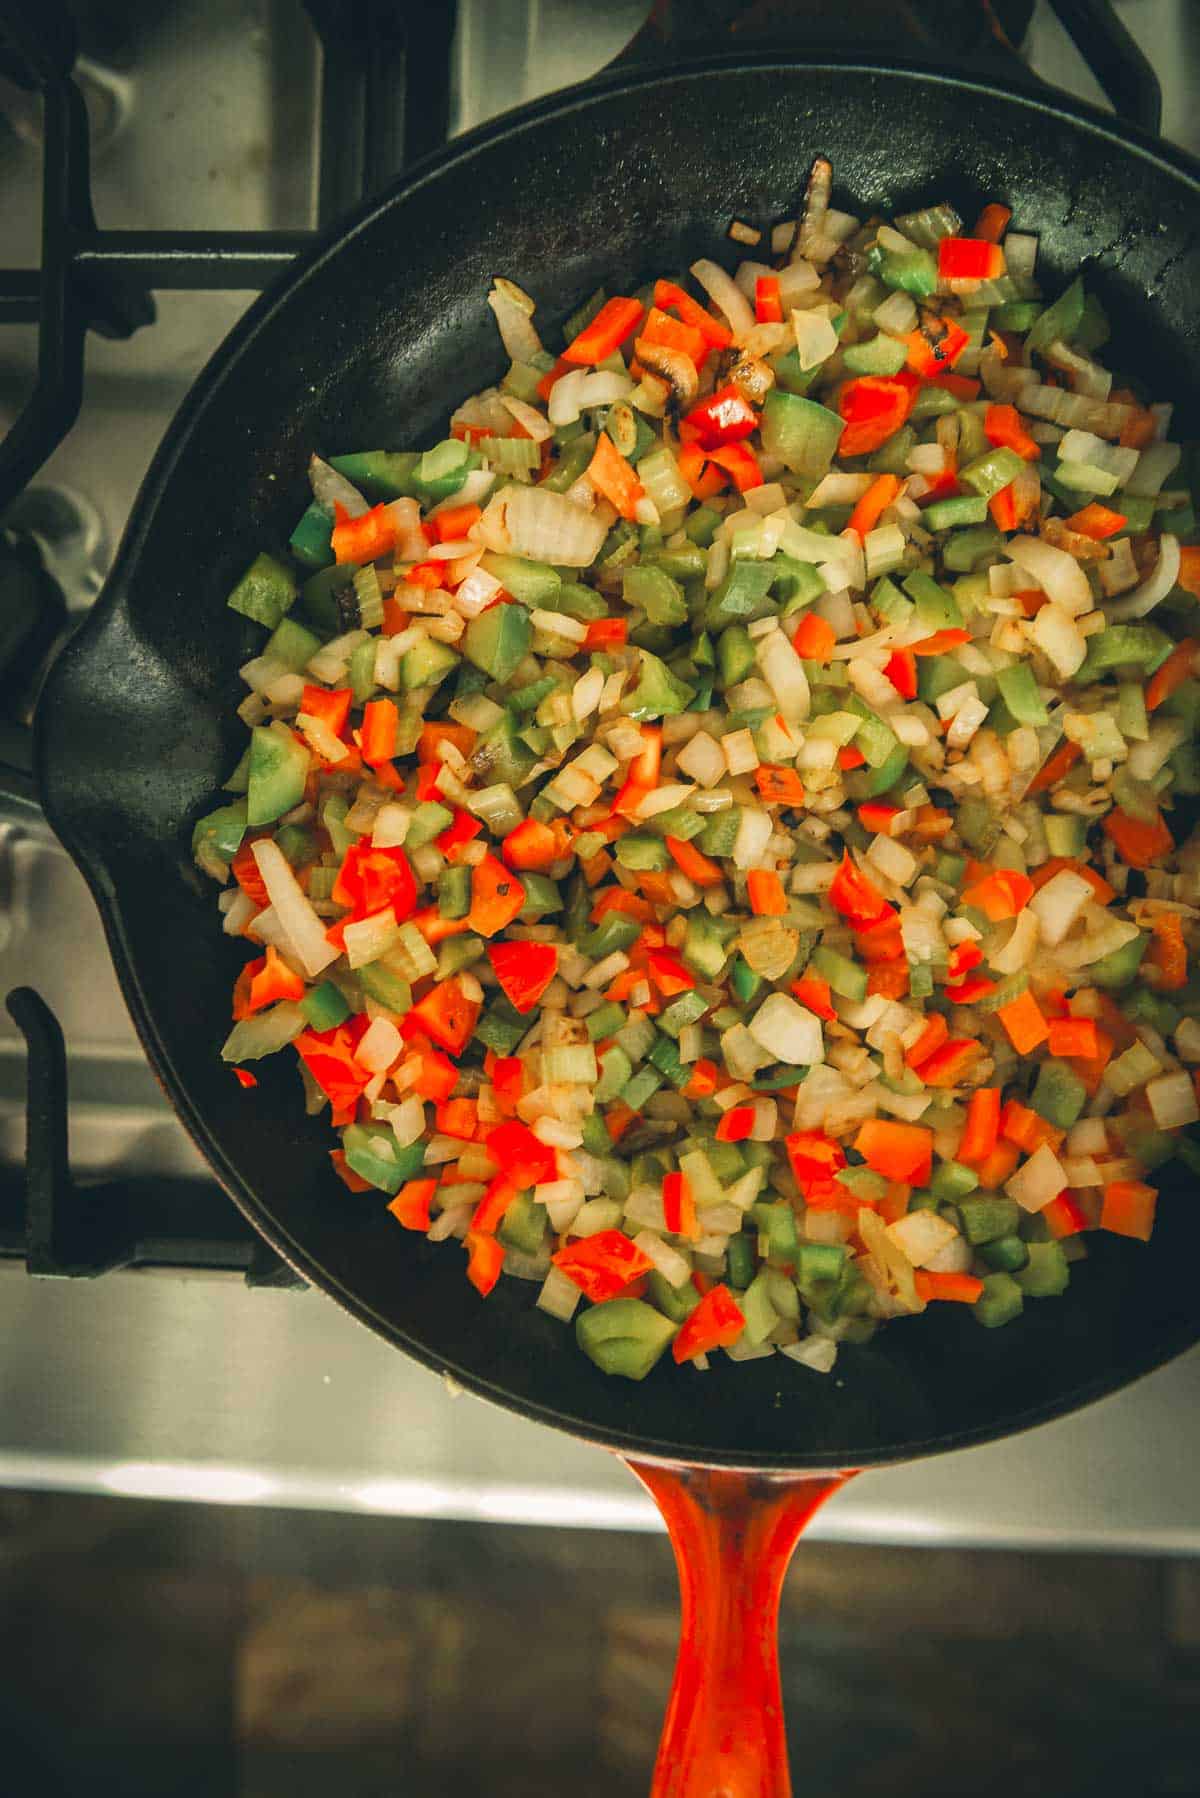 Showing softened veggies after they have cooked. 